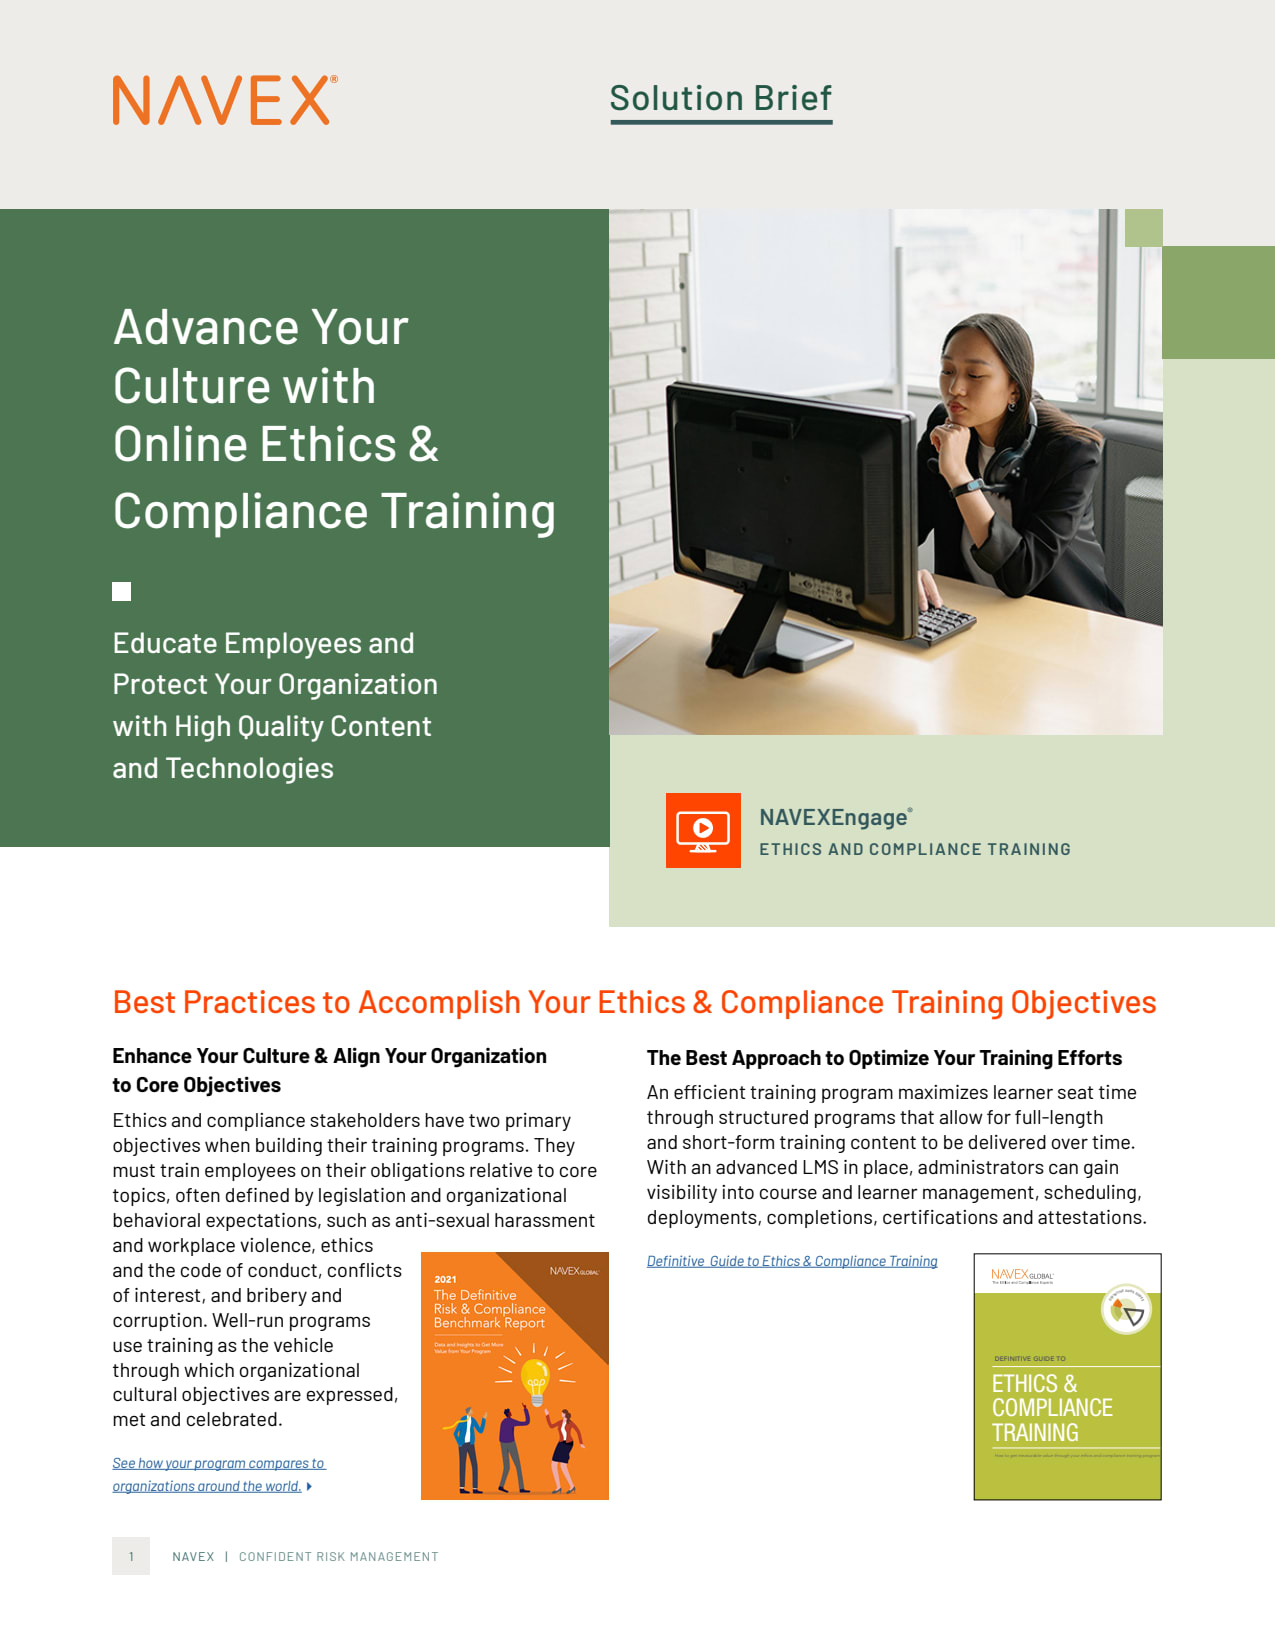 Advance Your Culture with Online Ethics & Compliance Training